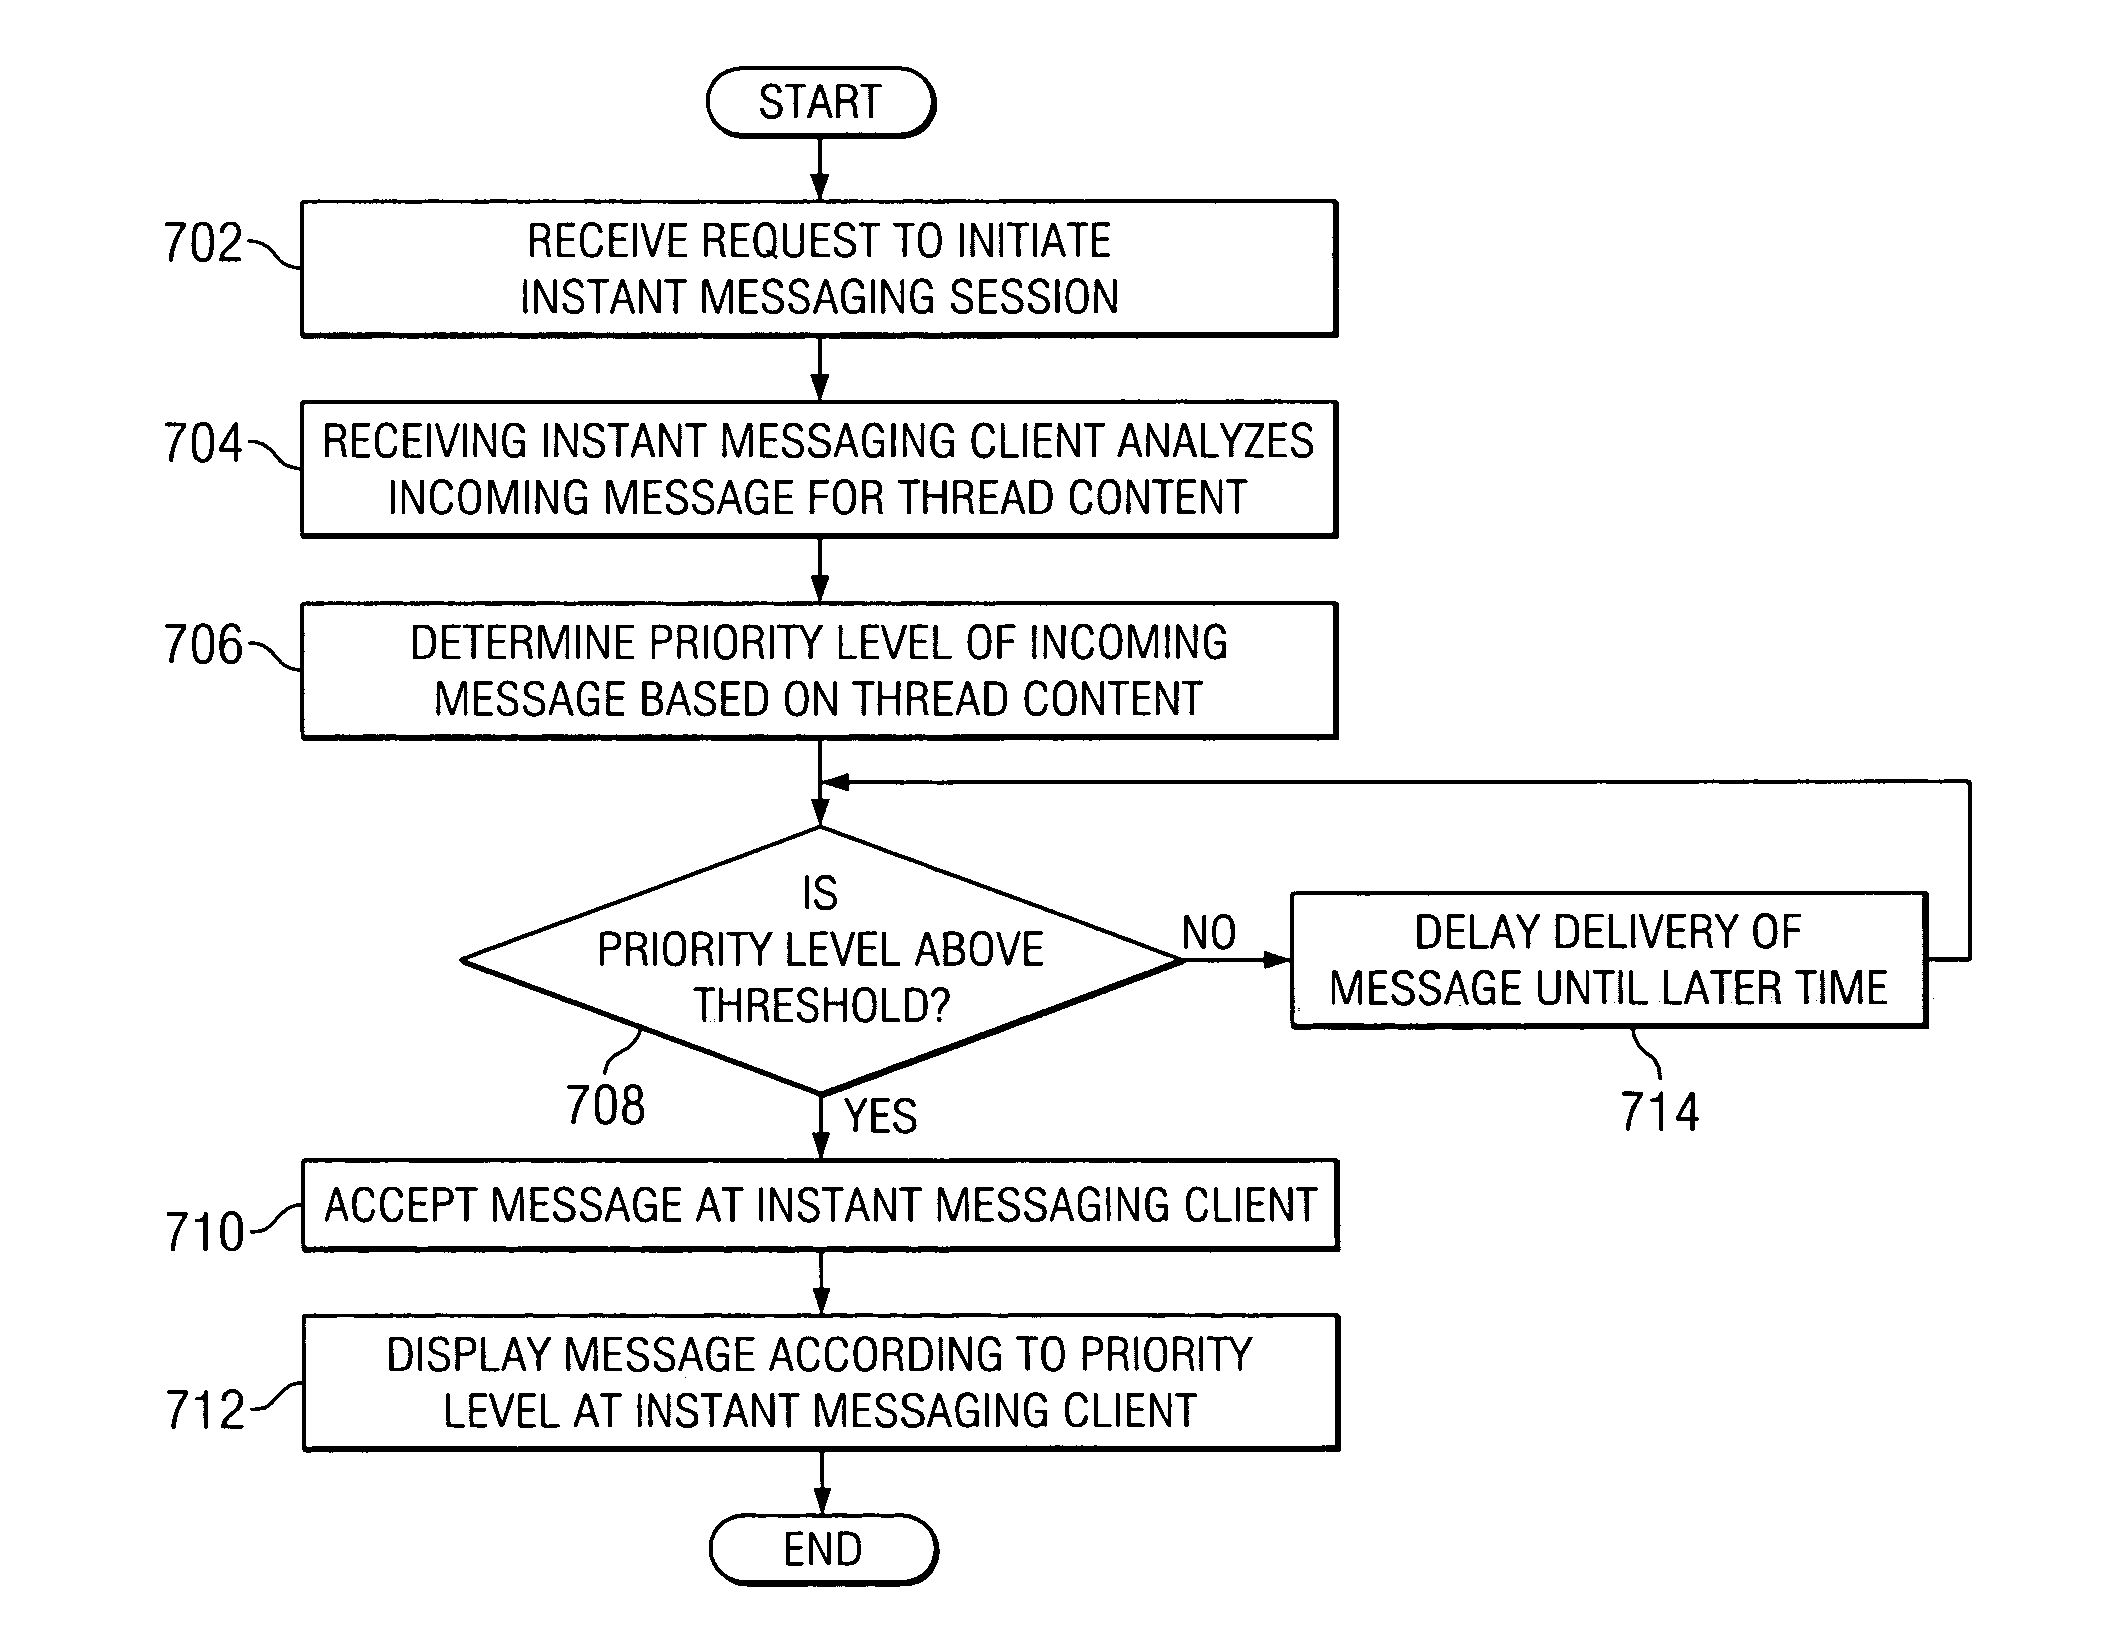 Instant messaging priority filtering based on content and hierarchical schemes